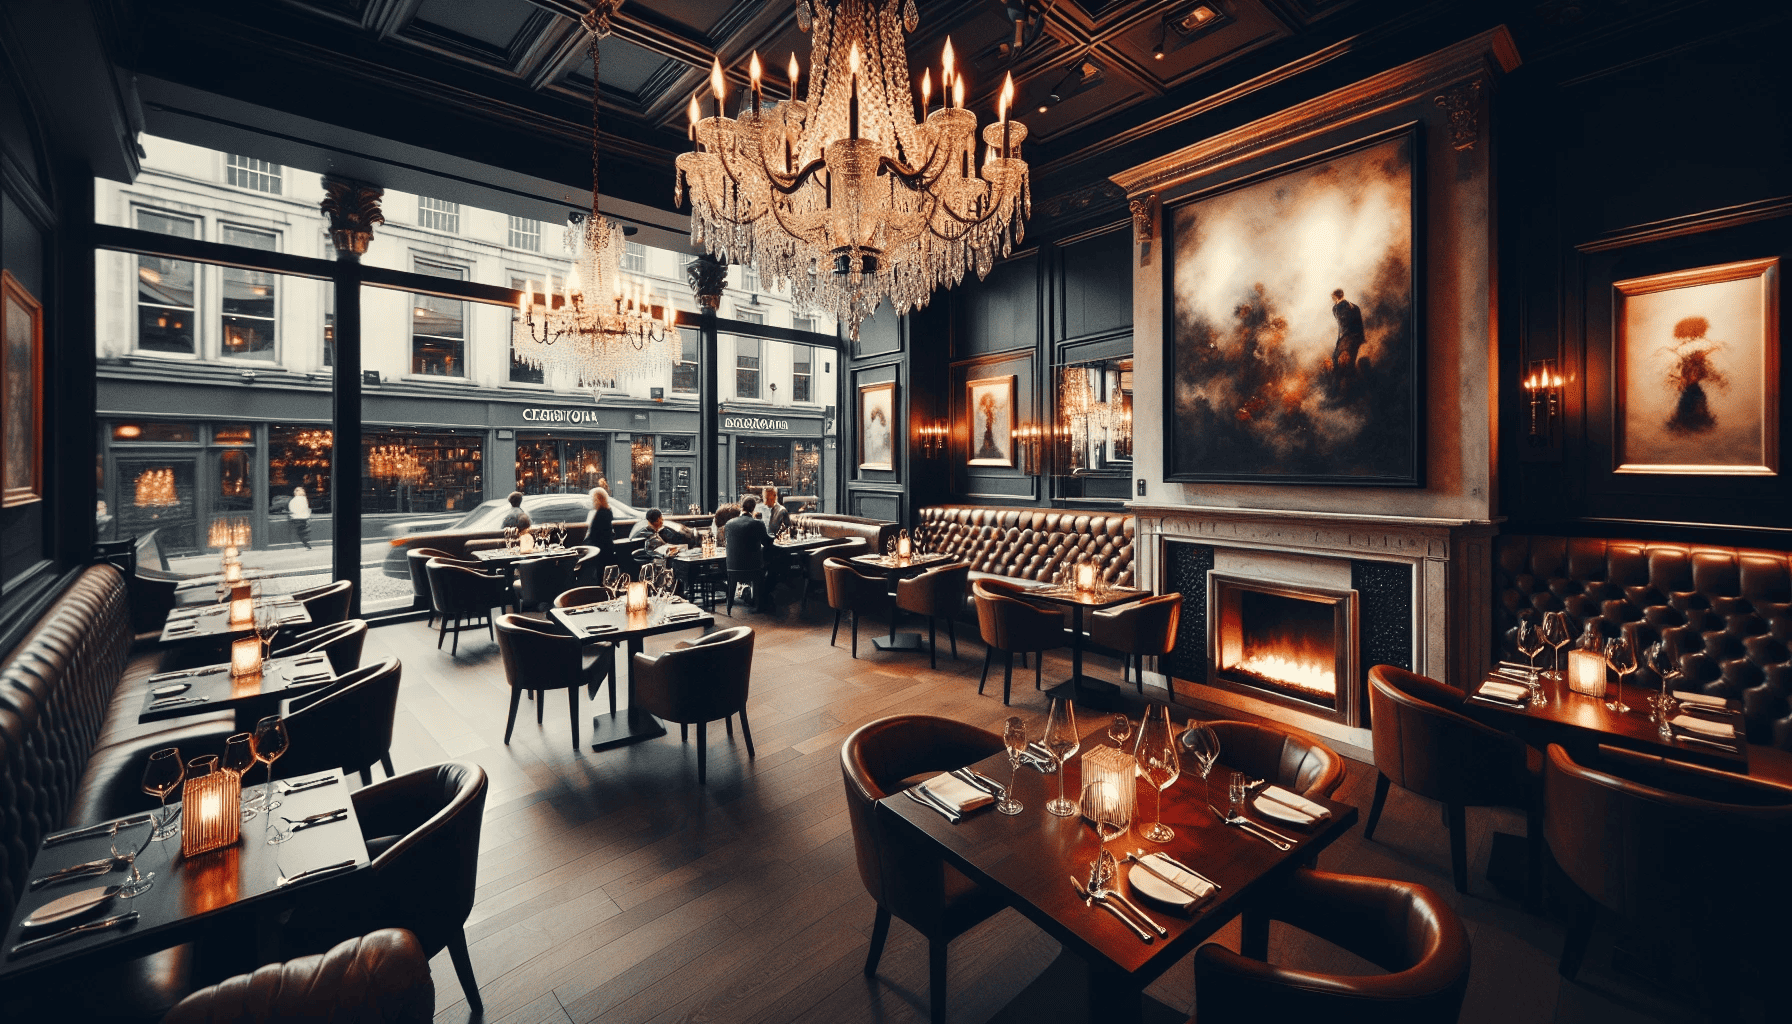 Elegant and refined ambiance of an upscale steakhouse in Belfast